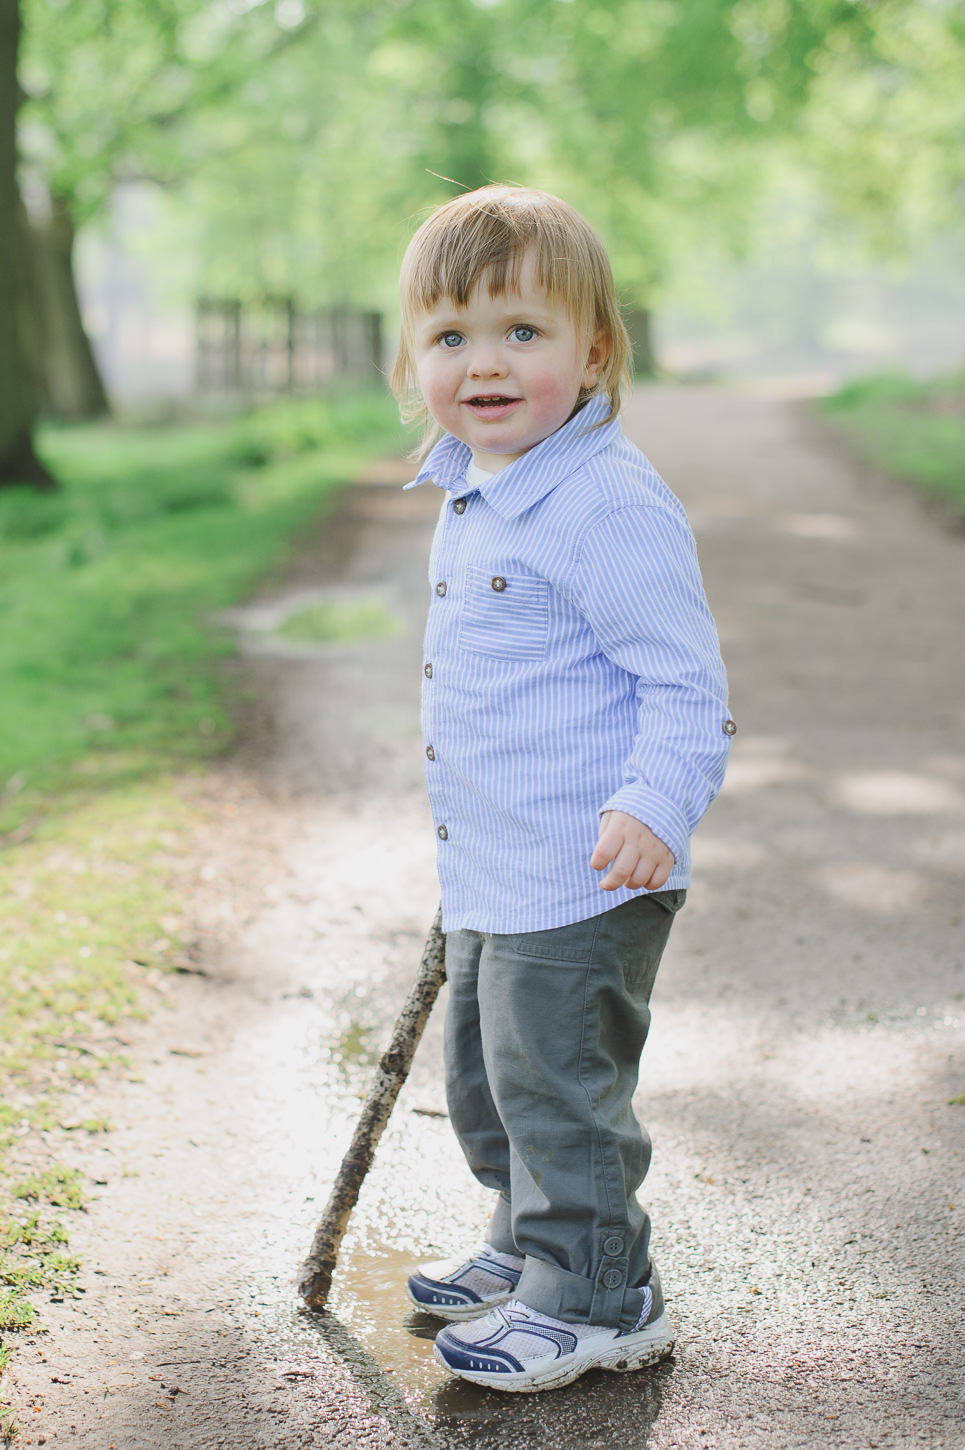 Child and Family Photography session in the park Sevenoaks - Susan Arnold Photography-13